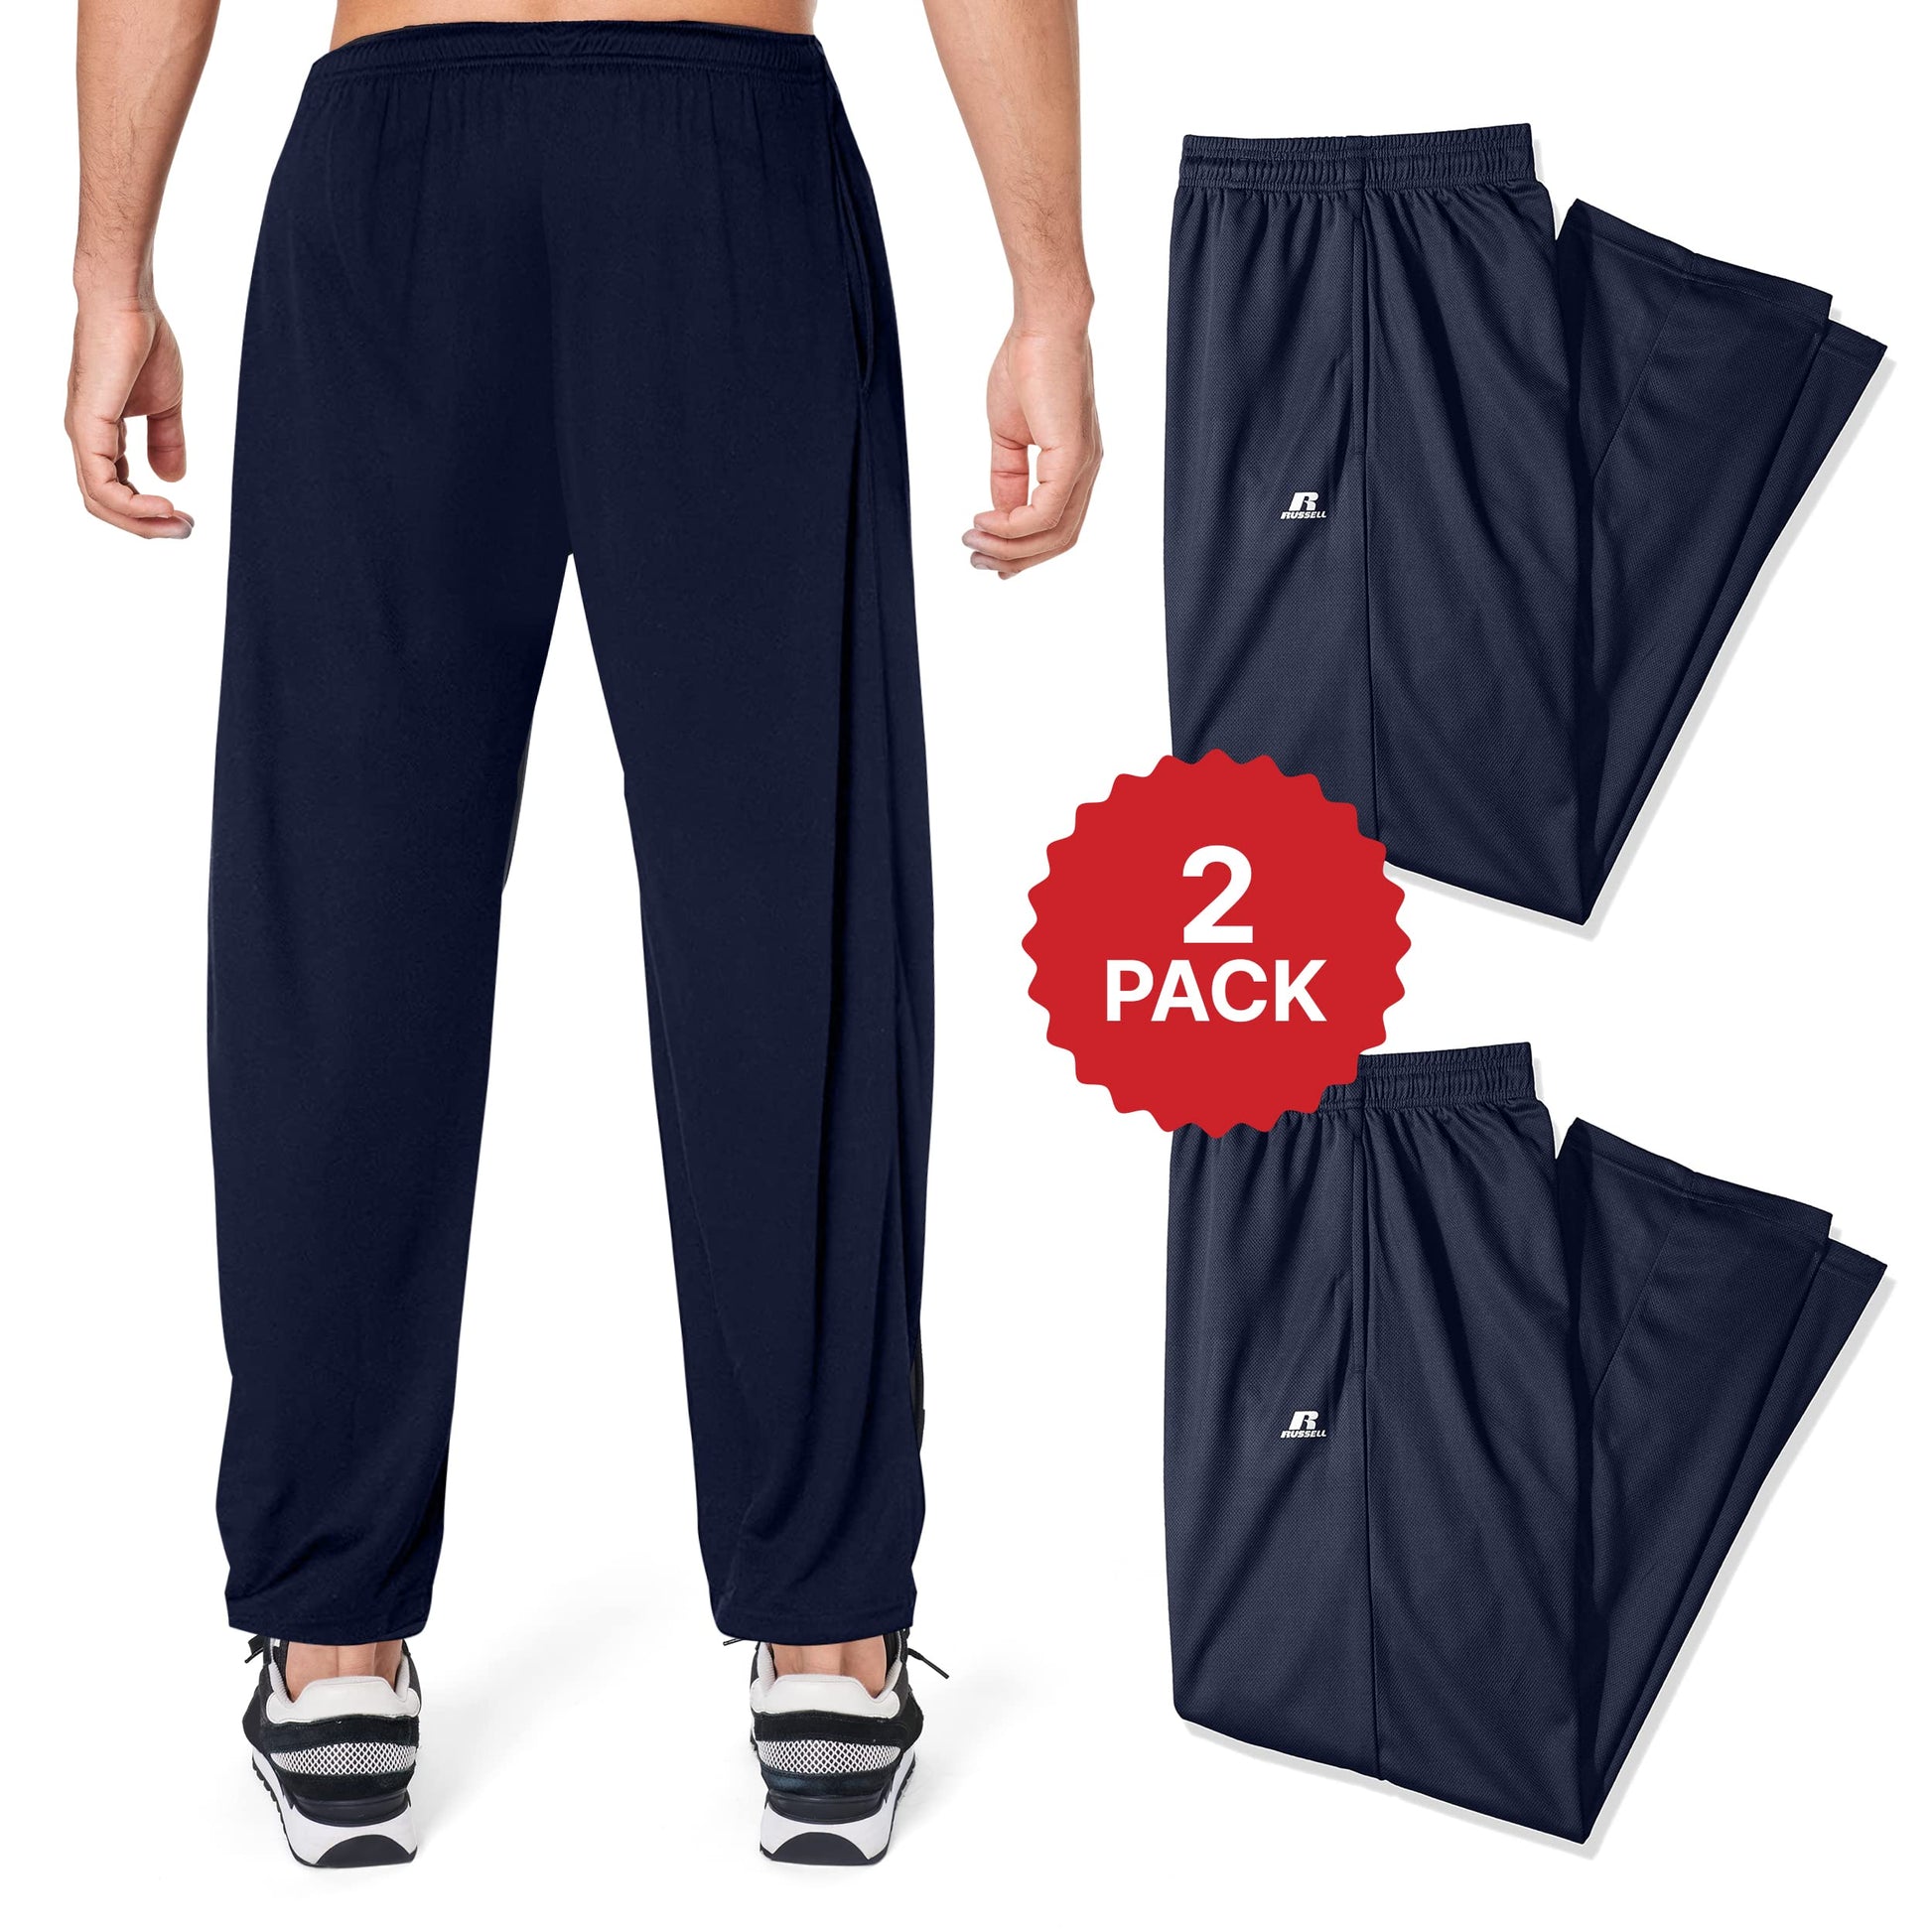 Russell Athletic Big & Tall Track Pants for Men, 2 Pack